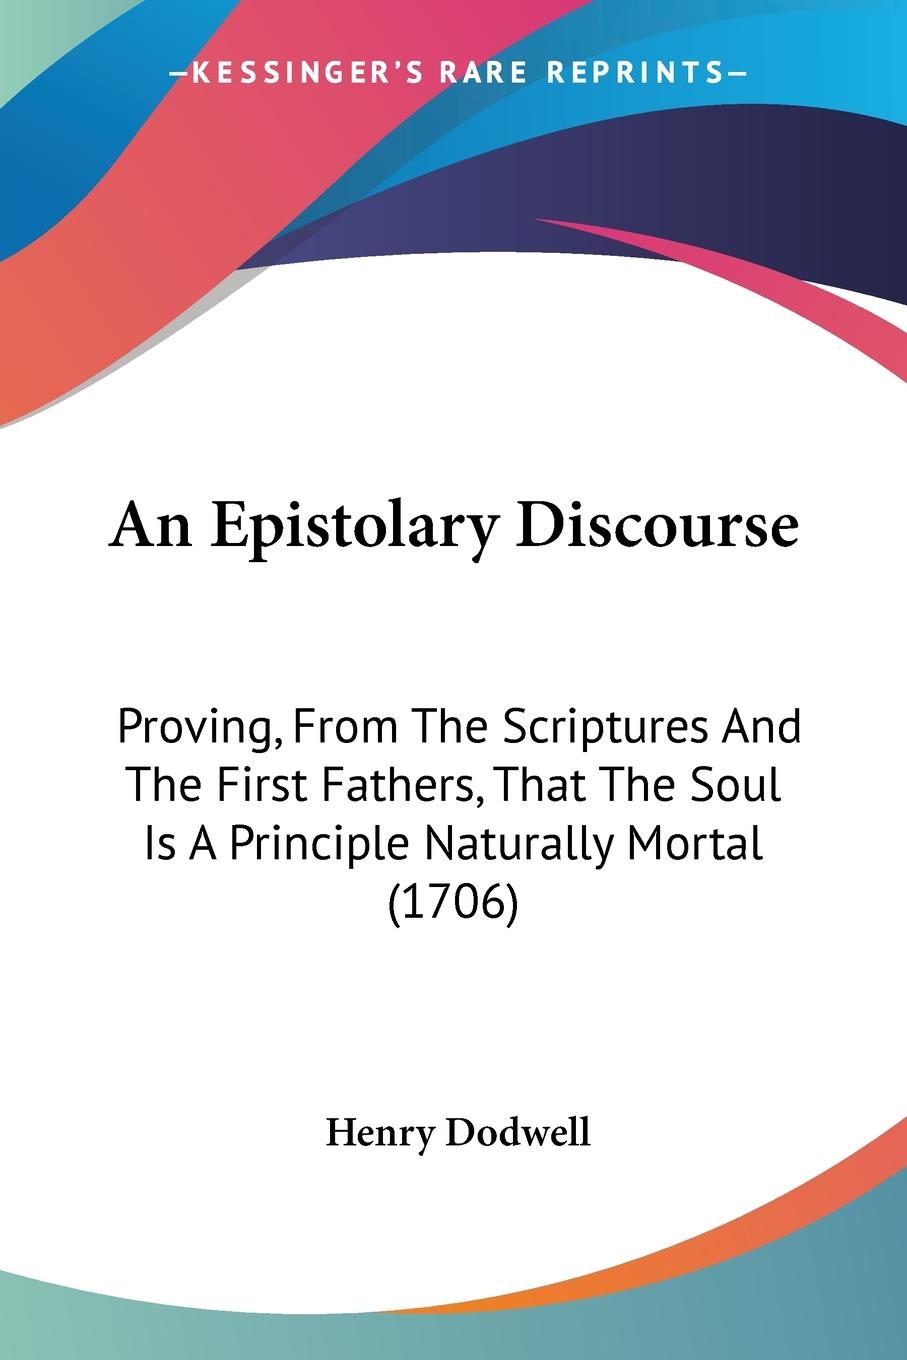 An Epistolary Discourse - Dodwell, Henry